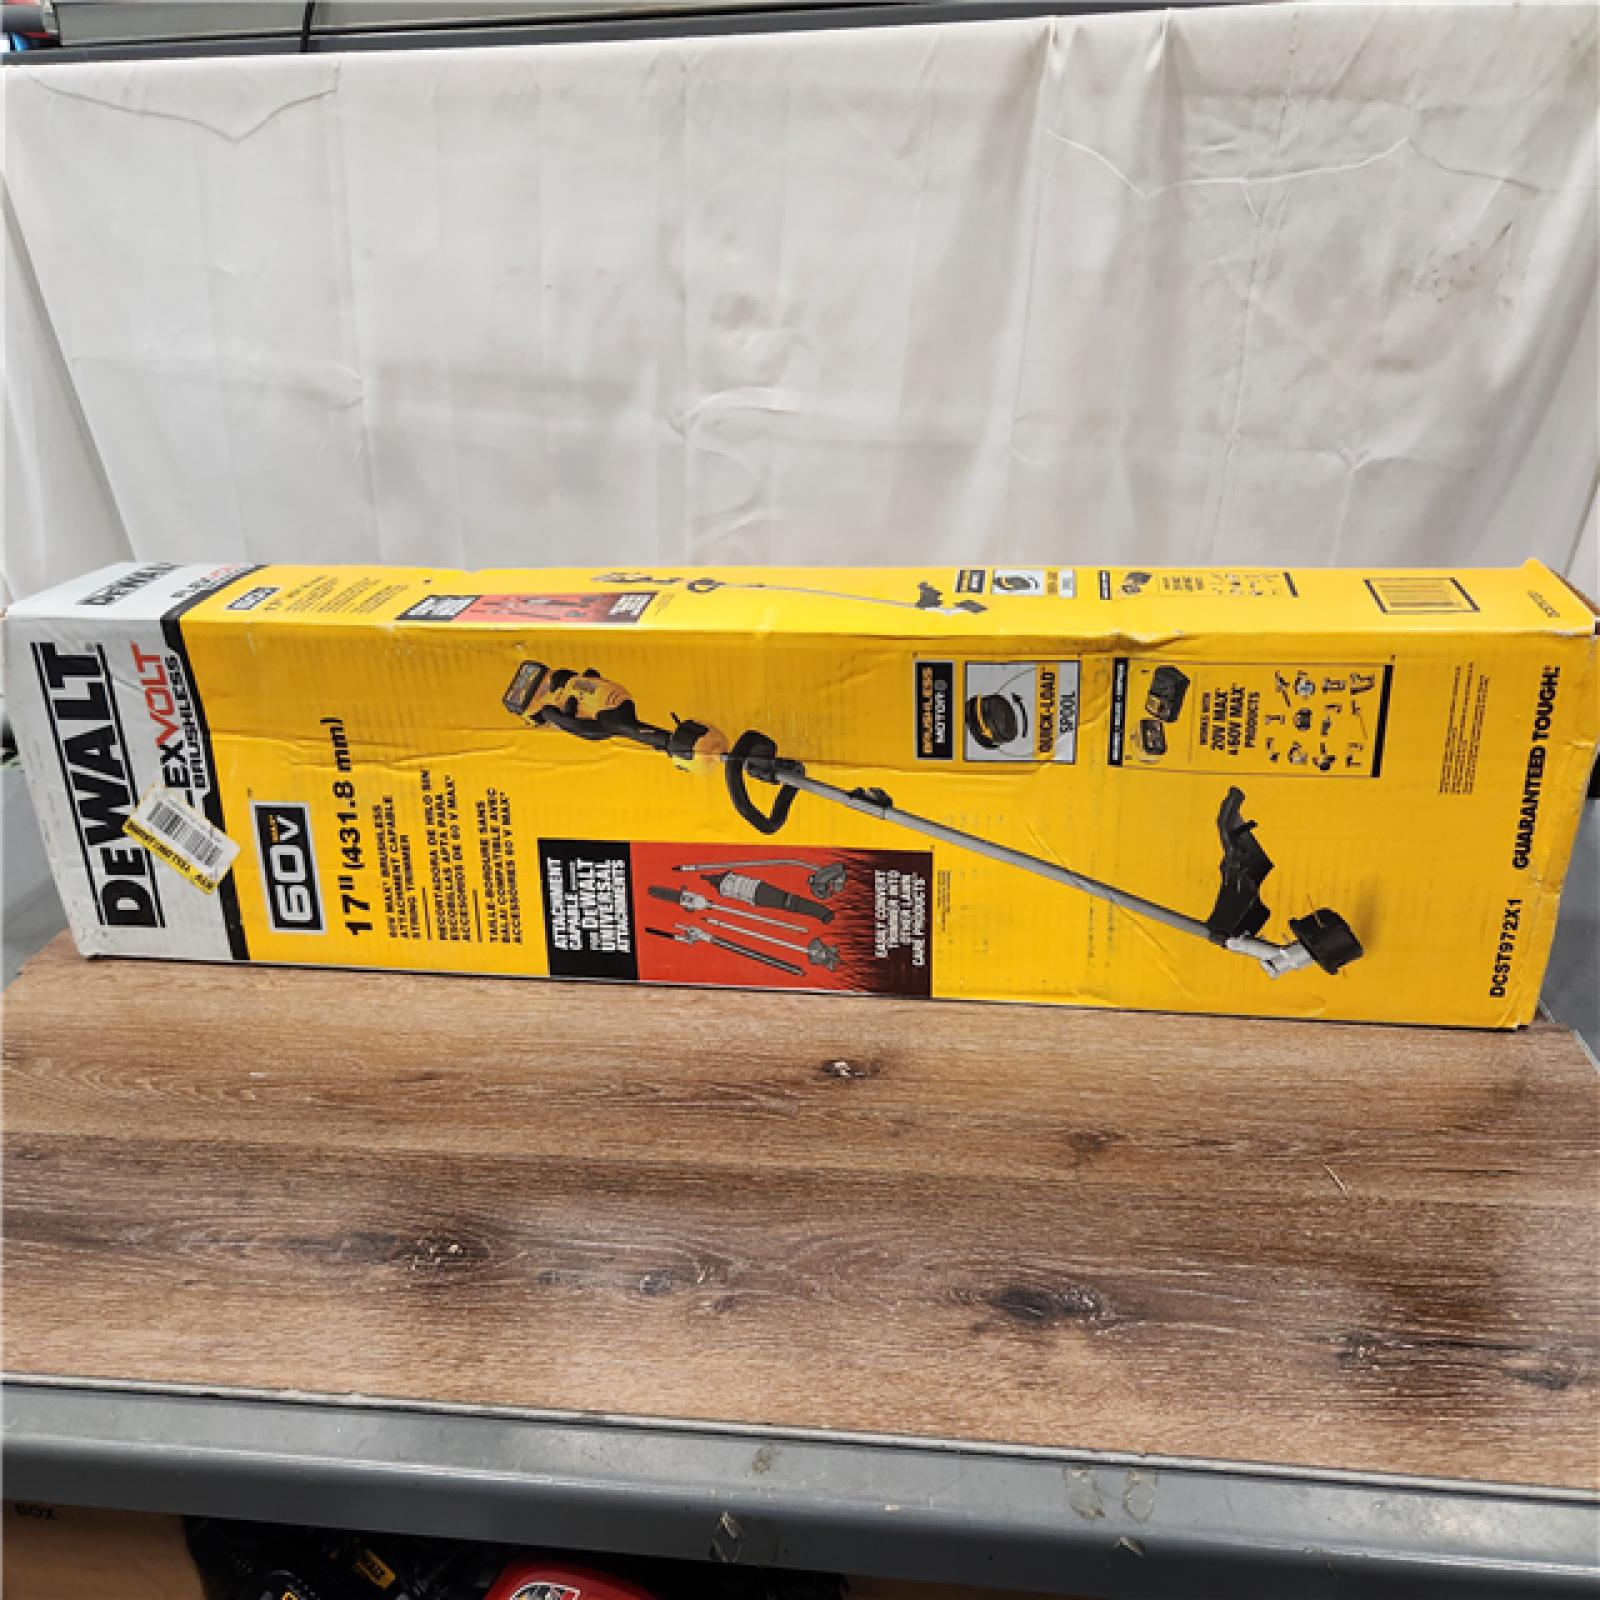 AS-IS DEWALT DCST972X1 FLEXVOLT 60V MAX Lithium-Ion Brushless Cordless Attachment Capable 17 String Trimmer (only tool)